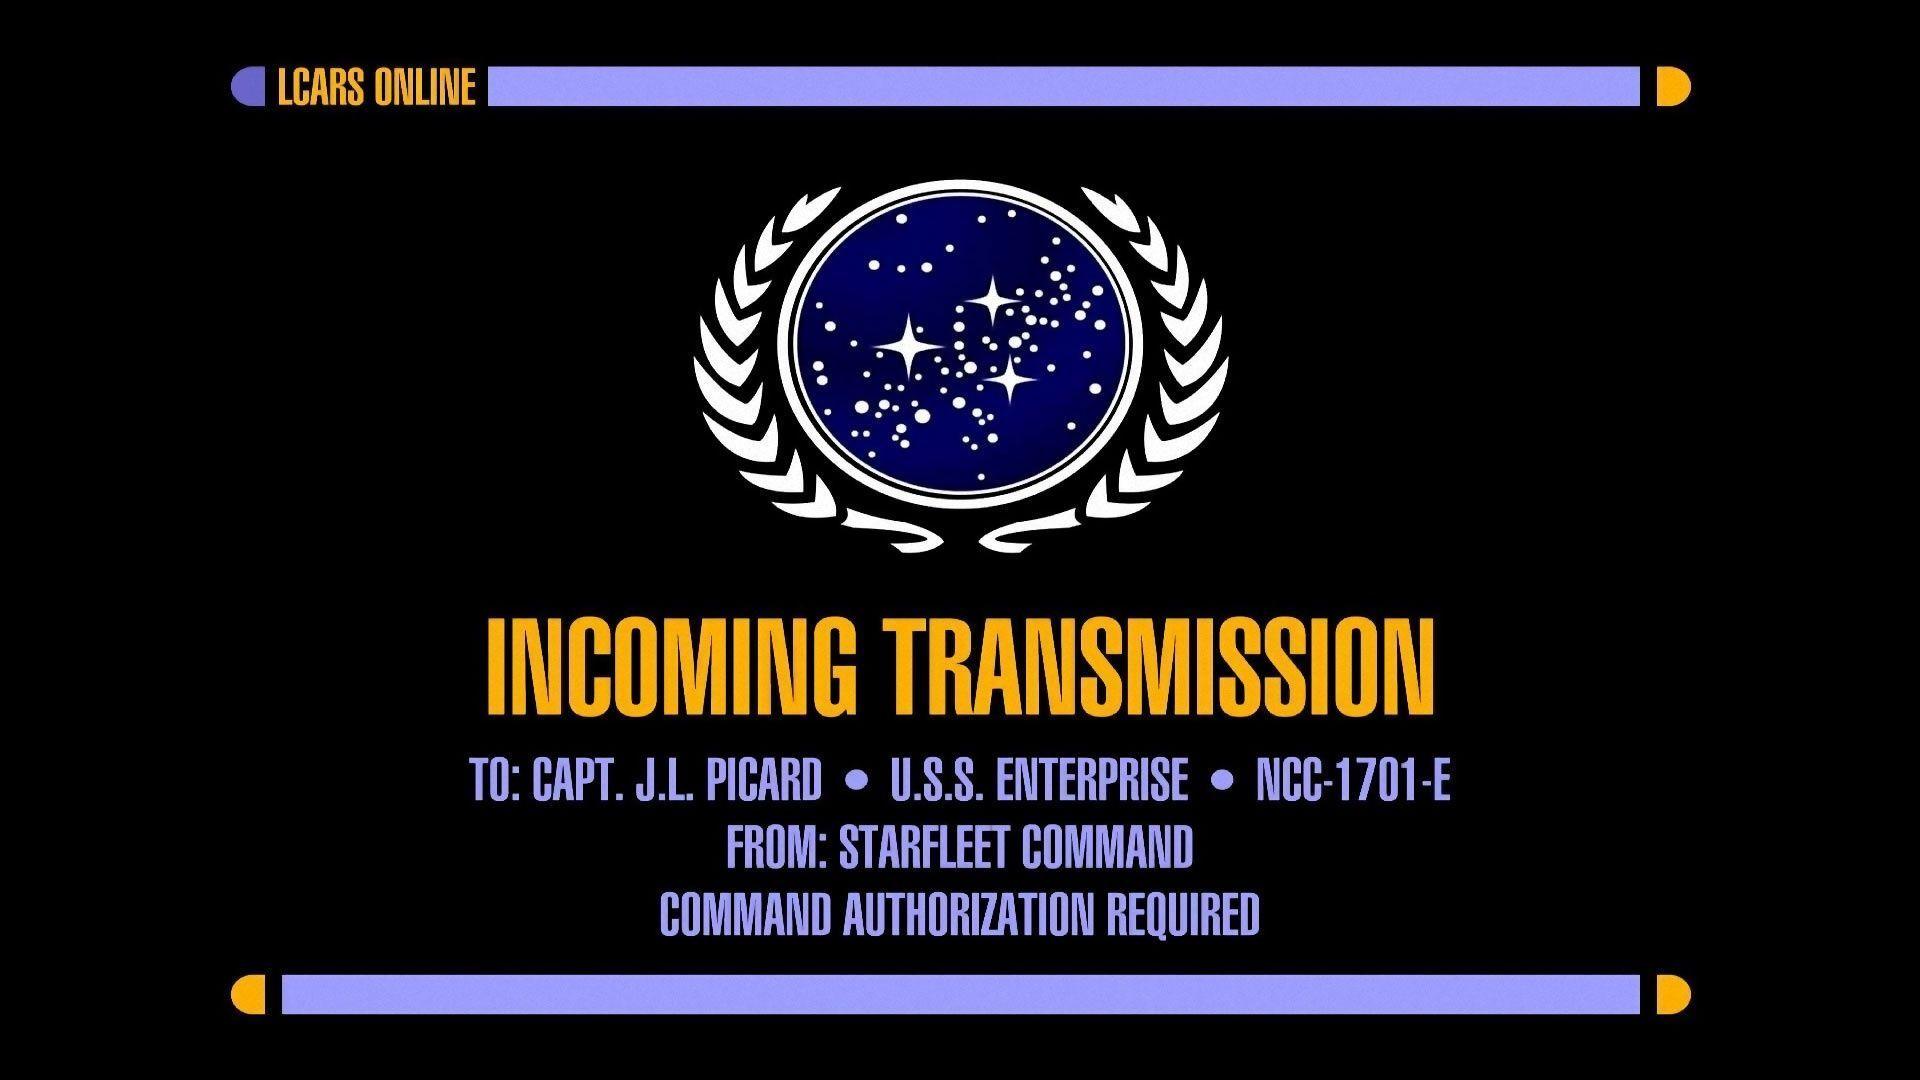 Star Trek Incoming Transmission Wallpaper Wide or HD. Typography